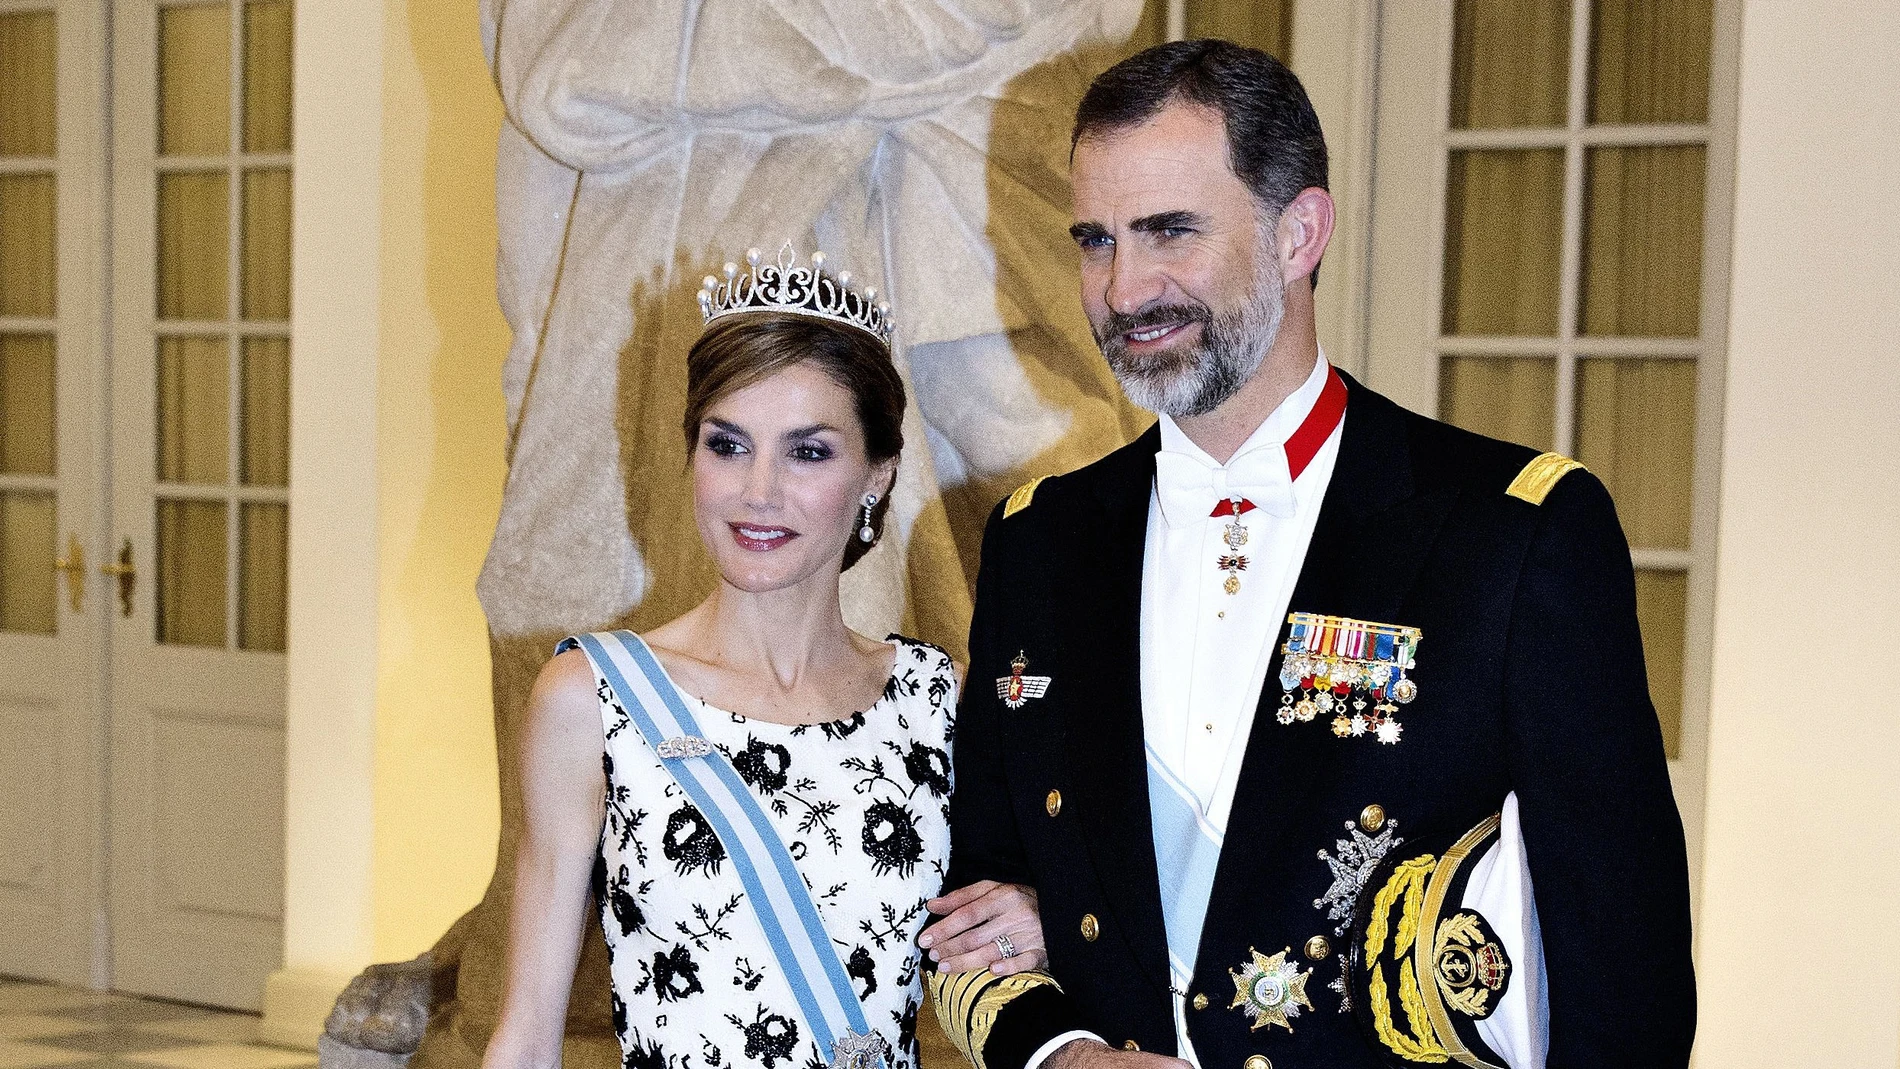 Queen Letizia and King Felipe VI of Spain arrive for a gala dinner to celebrate Danish Queen Margrethe's 75th birthday at Christiansborg Palace in Copenhagen, Wednesday April 15, 2015. 